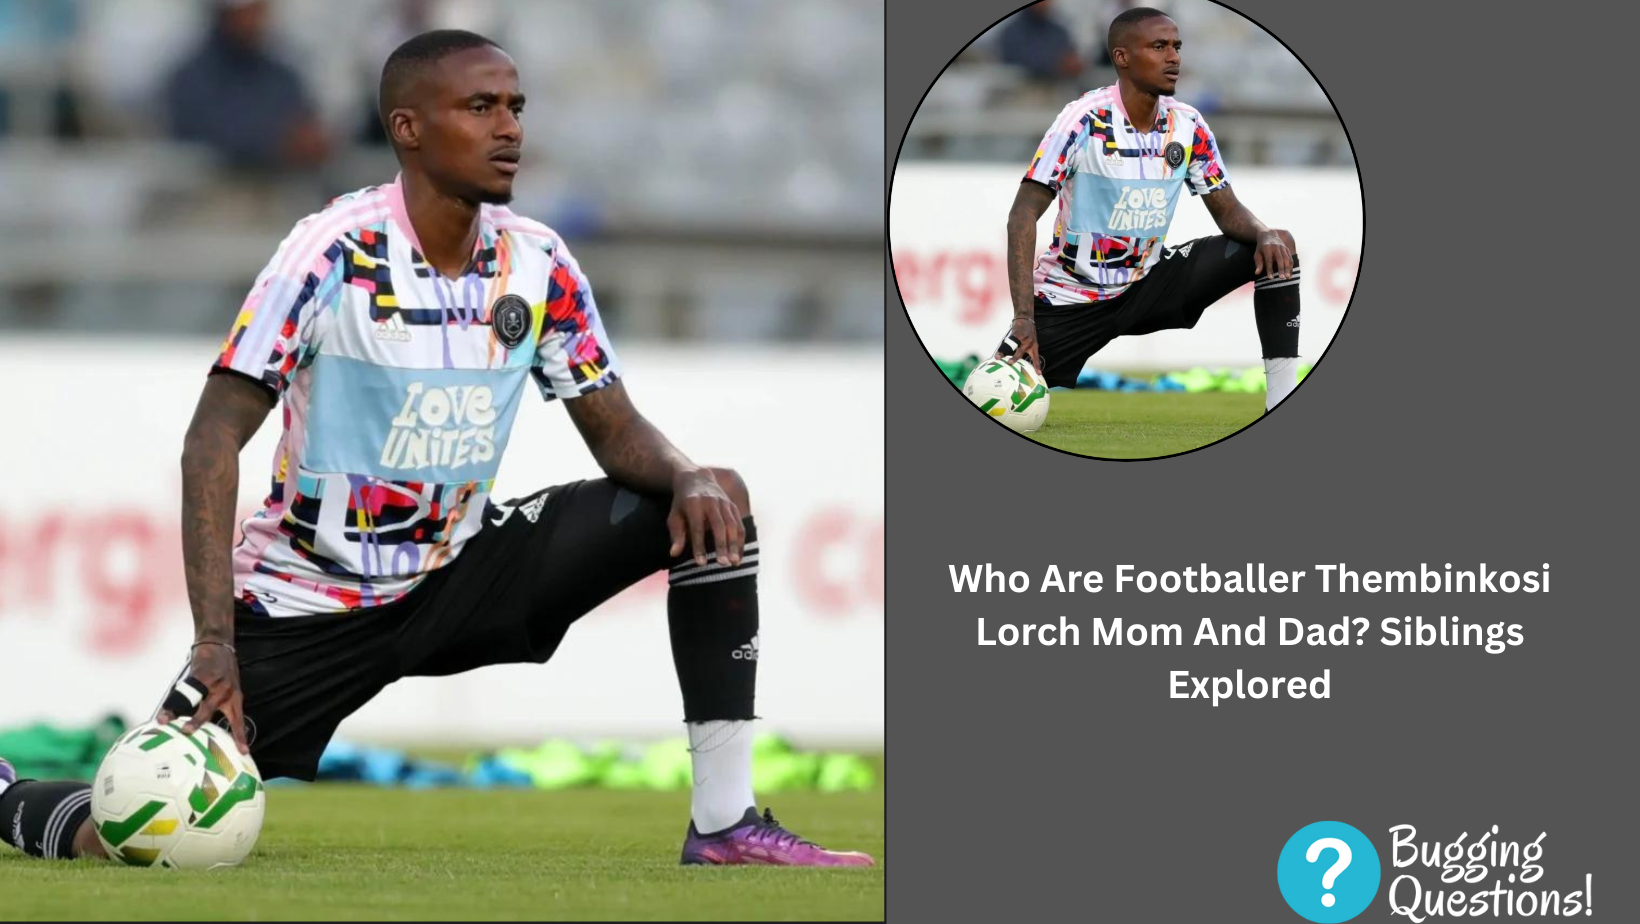 Who Are Footballer Thembinkosi Lorch Mom And Dad?